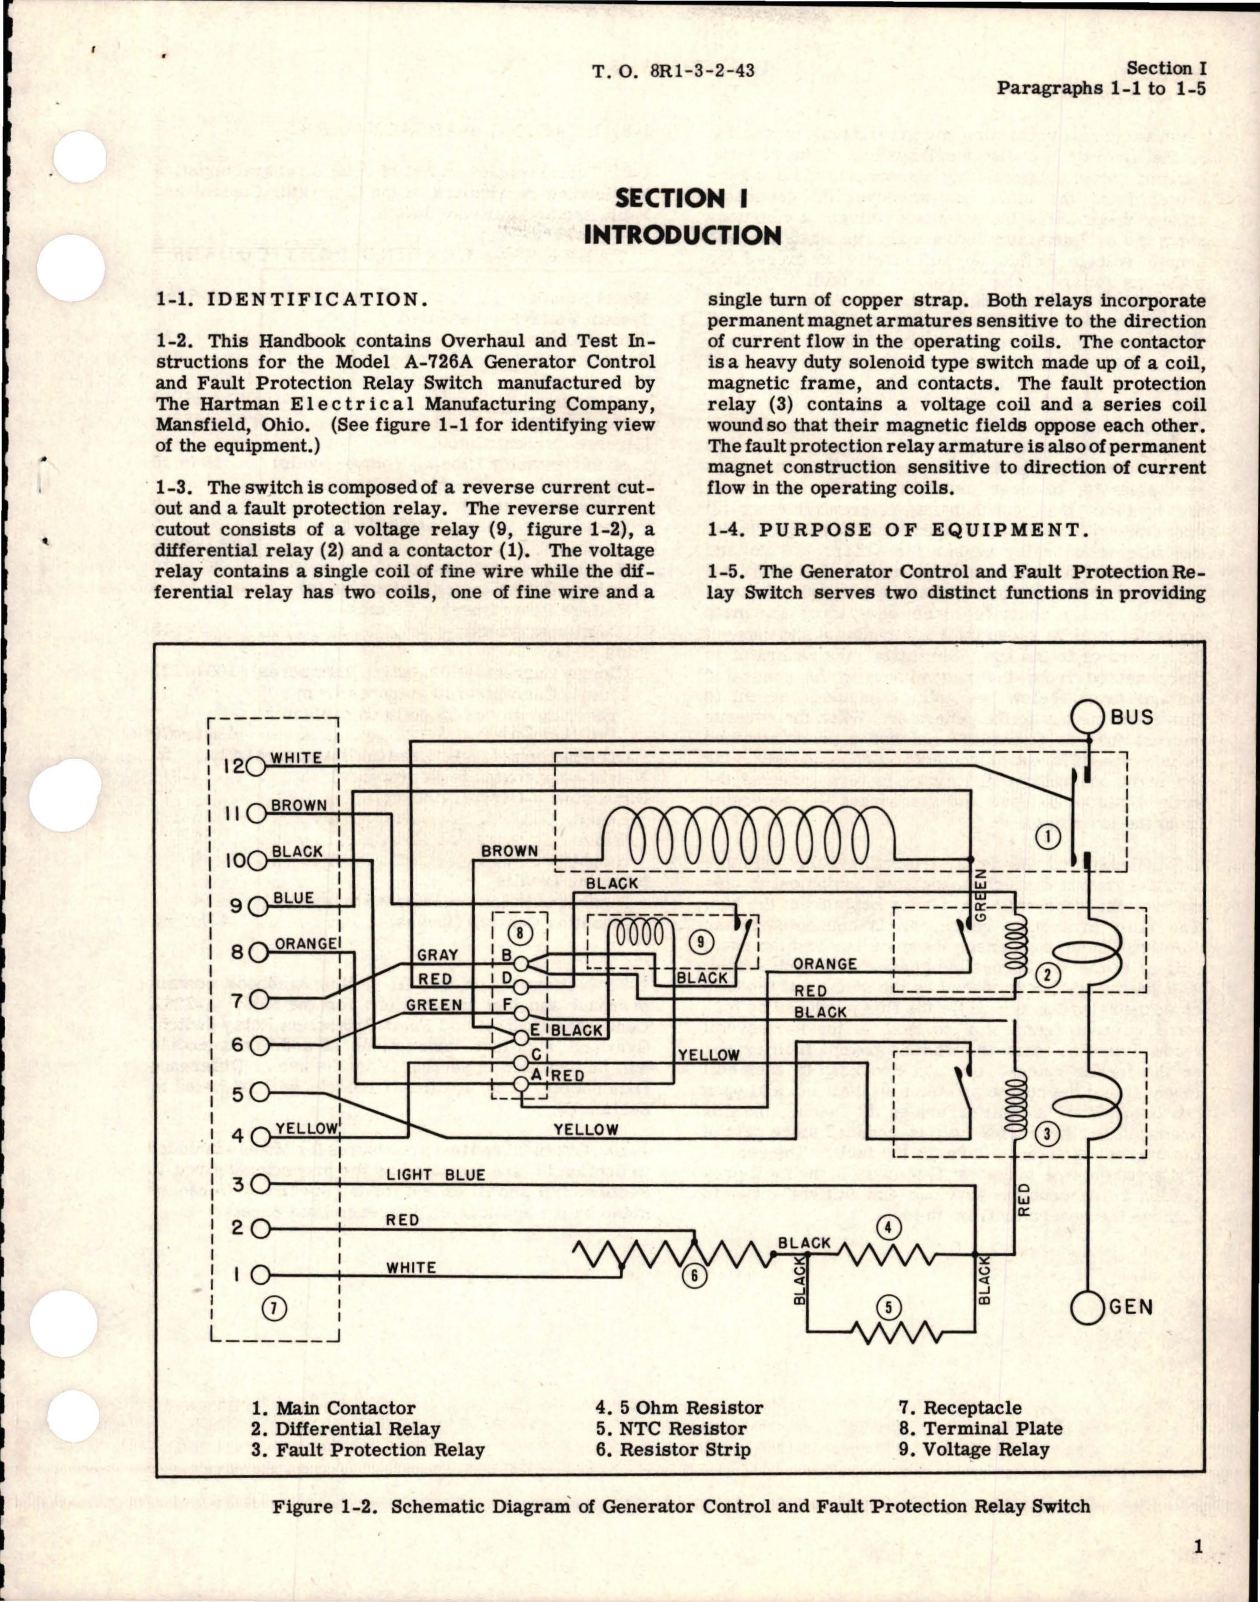 Sample page 7 from AirCorps Library document: Overhaul Instructions for Generator Control and Fault Protection Relay Switch - Model A-726 A